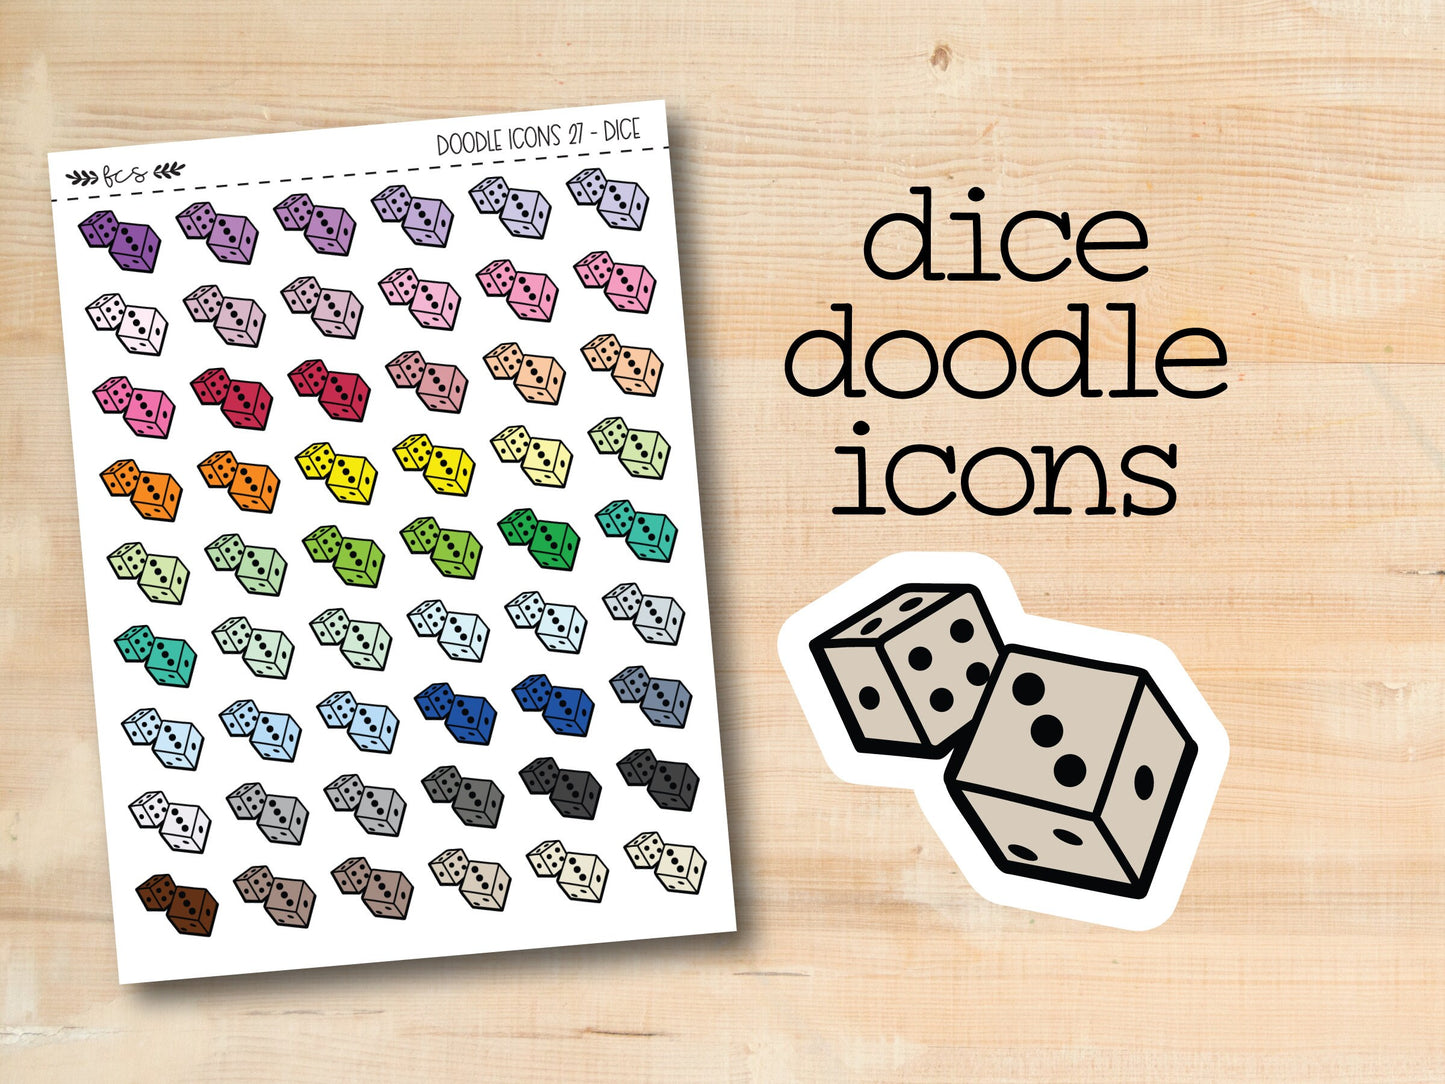 dice doodle icons on a wooden surface